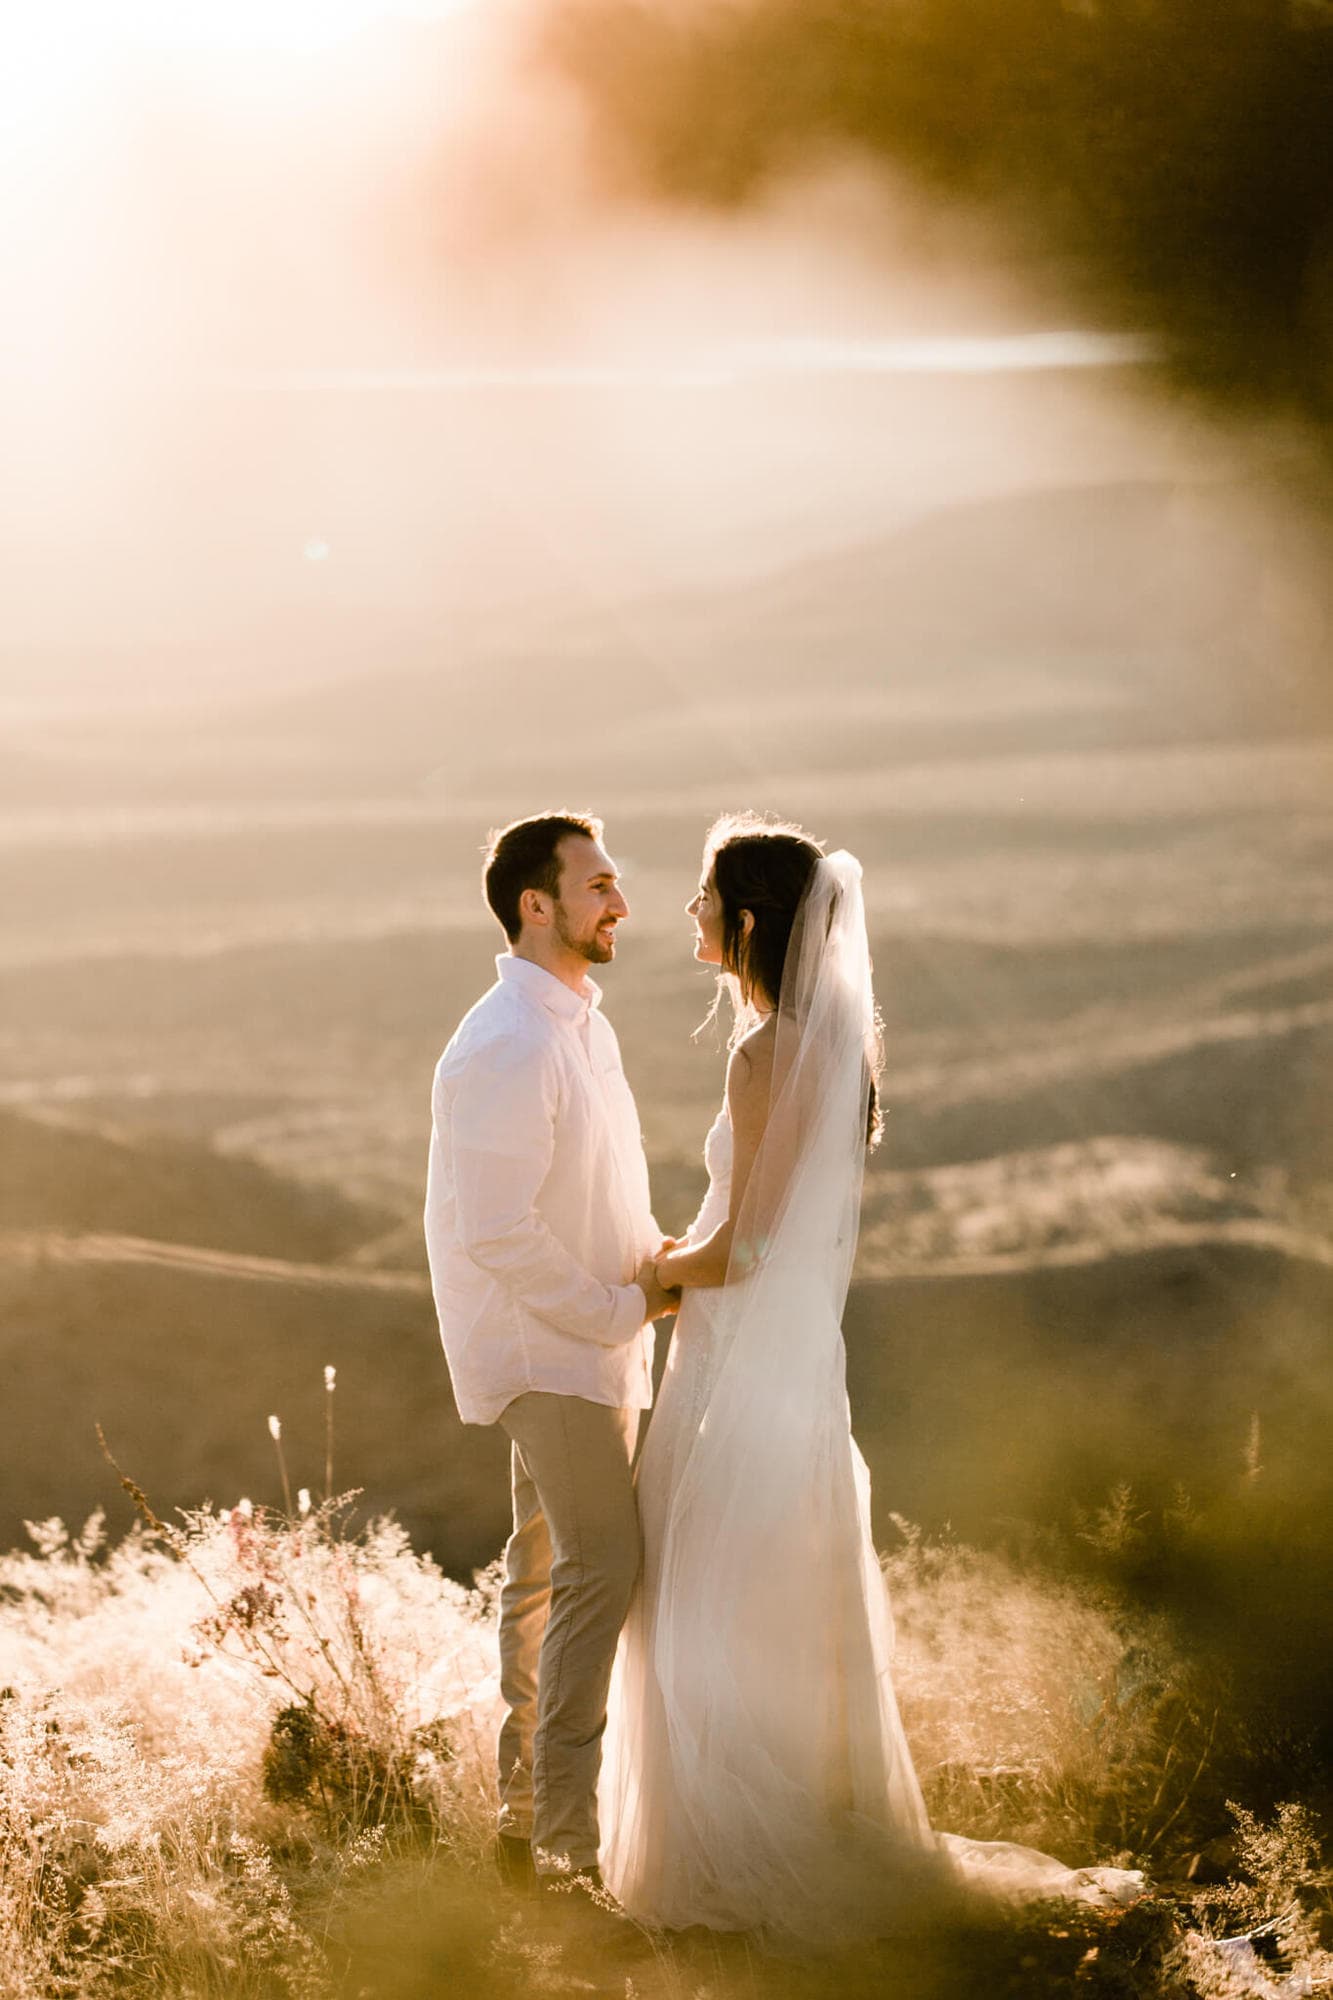 There are tons of gorgeous places to elope in the desert, but this gorgeous overlook is special. If you're looking for an off-the-beaten-path for your elopement, this inspiration is for you.